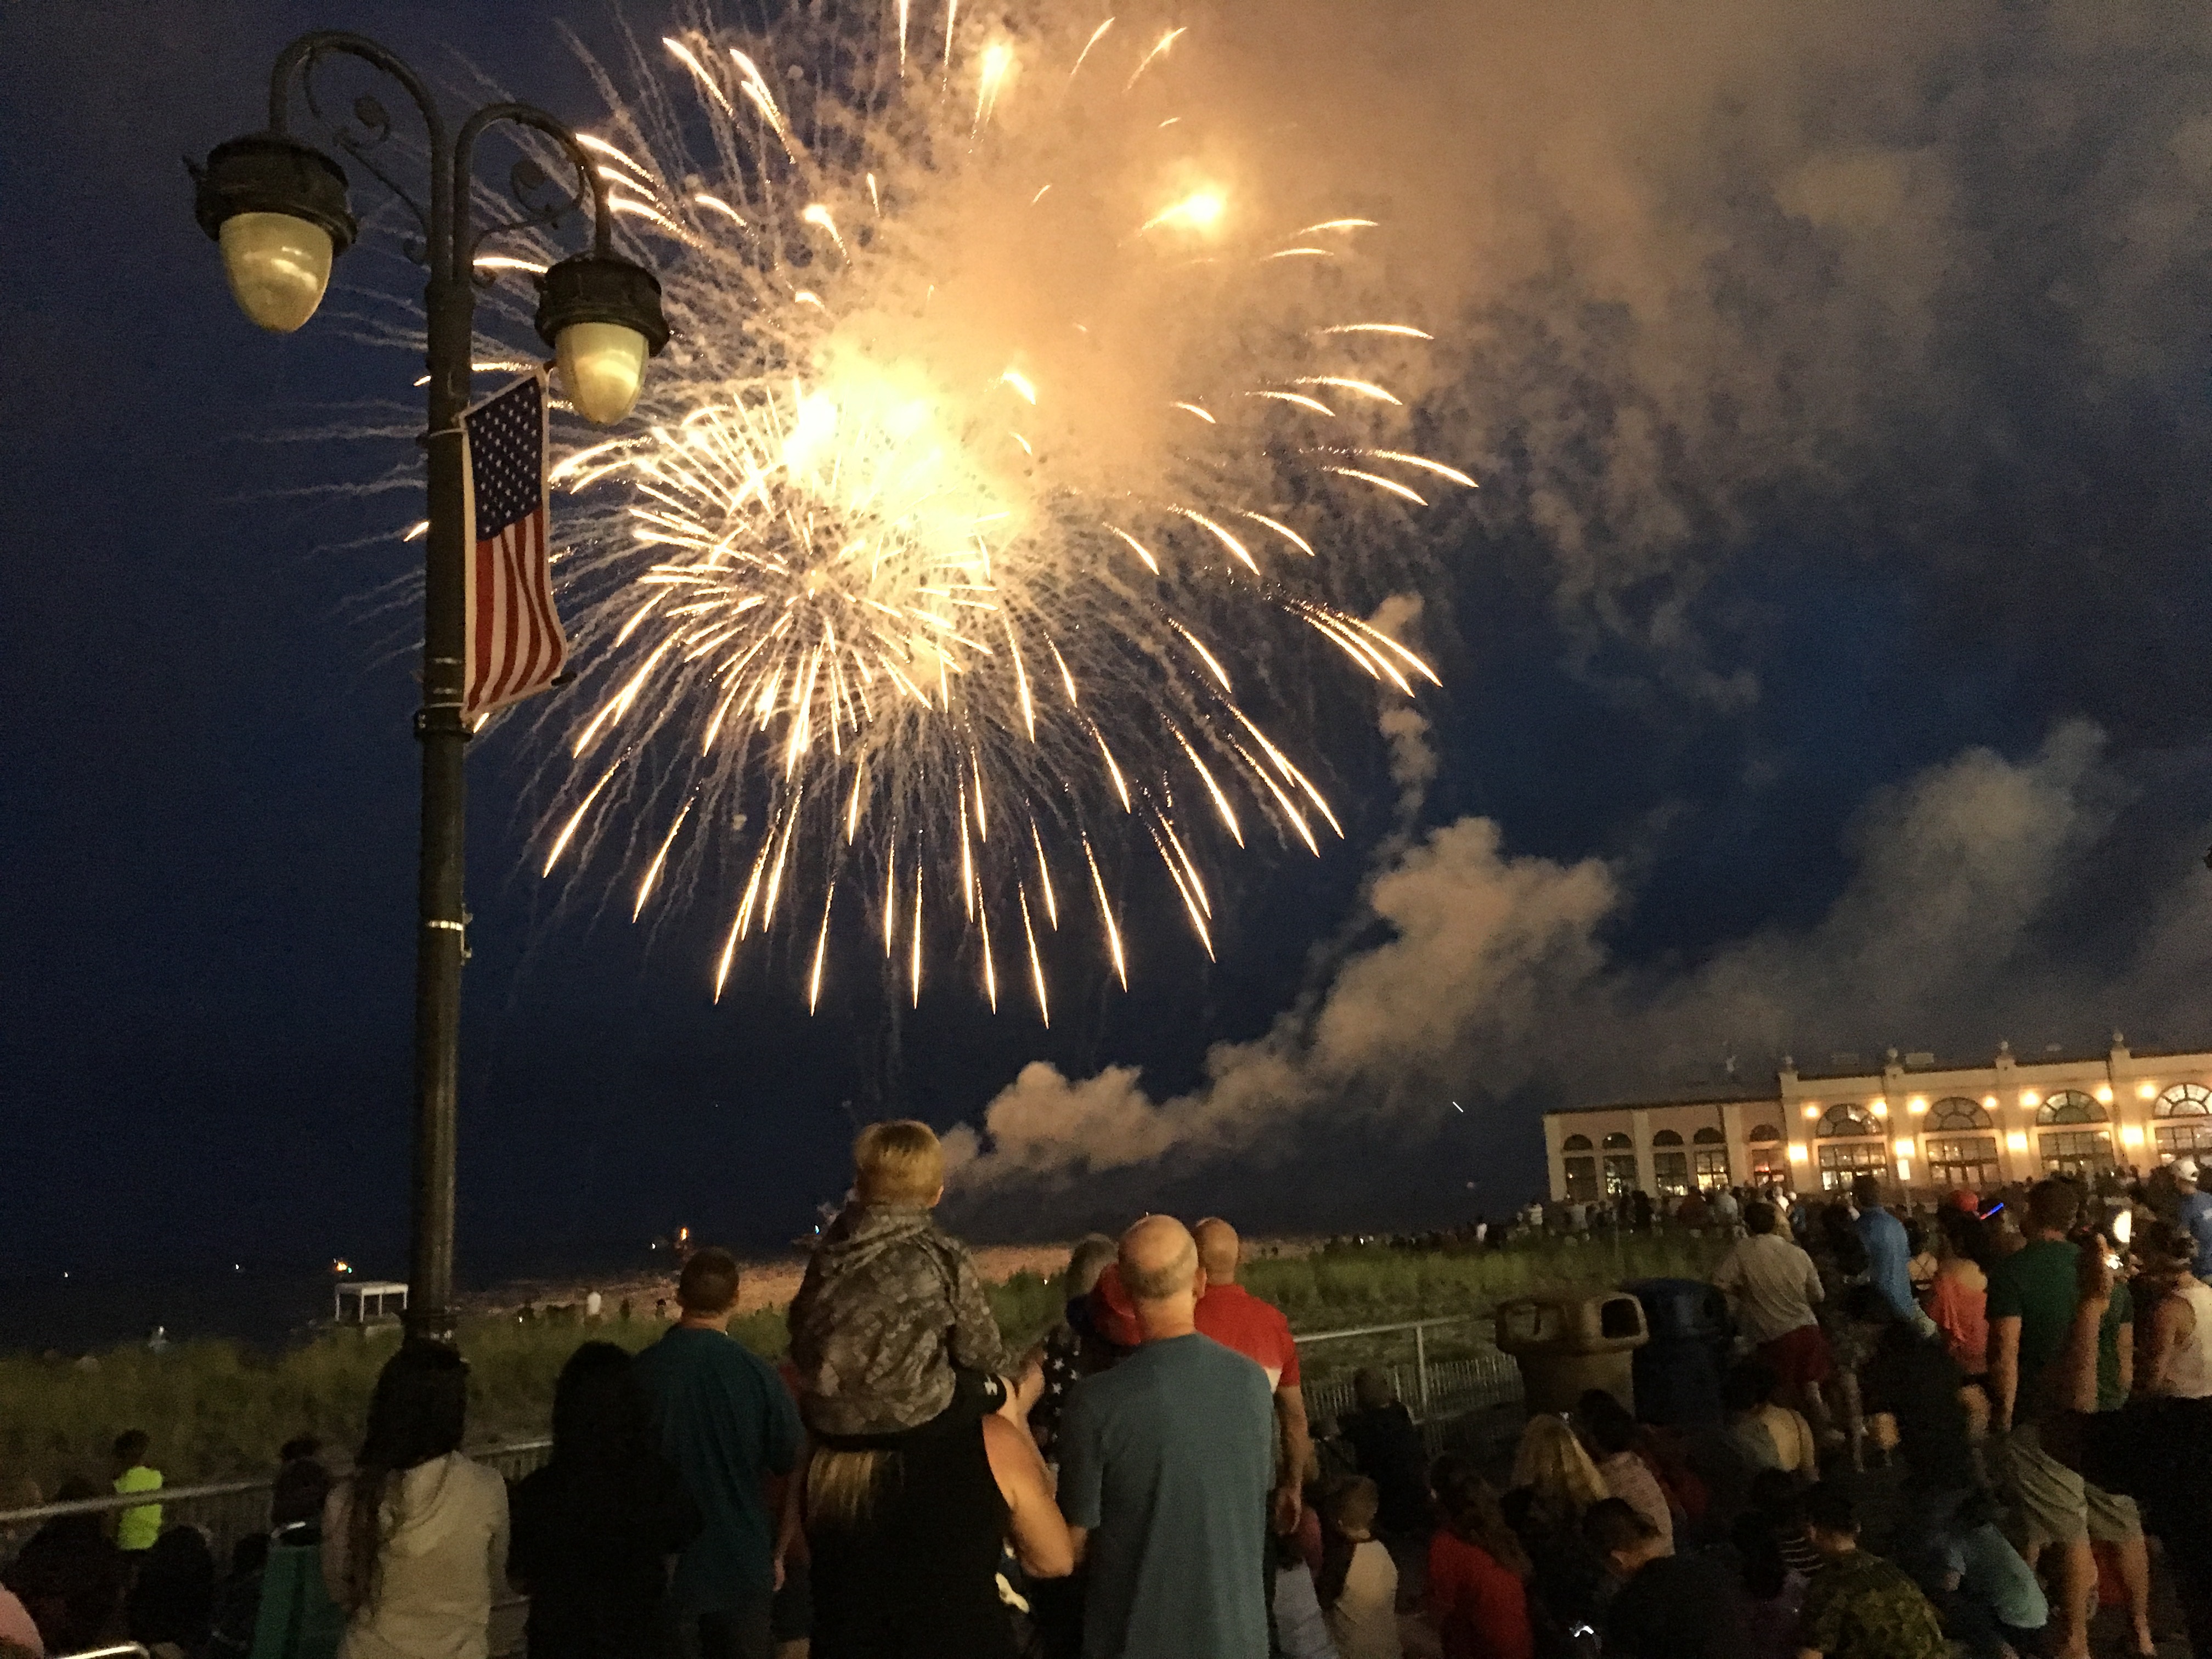 Ocean City Nj Fireworks 2021 / Ocean City Hosts July 4th Holiday Events